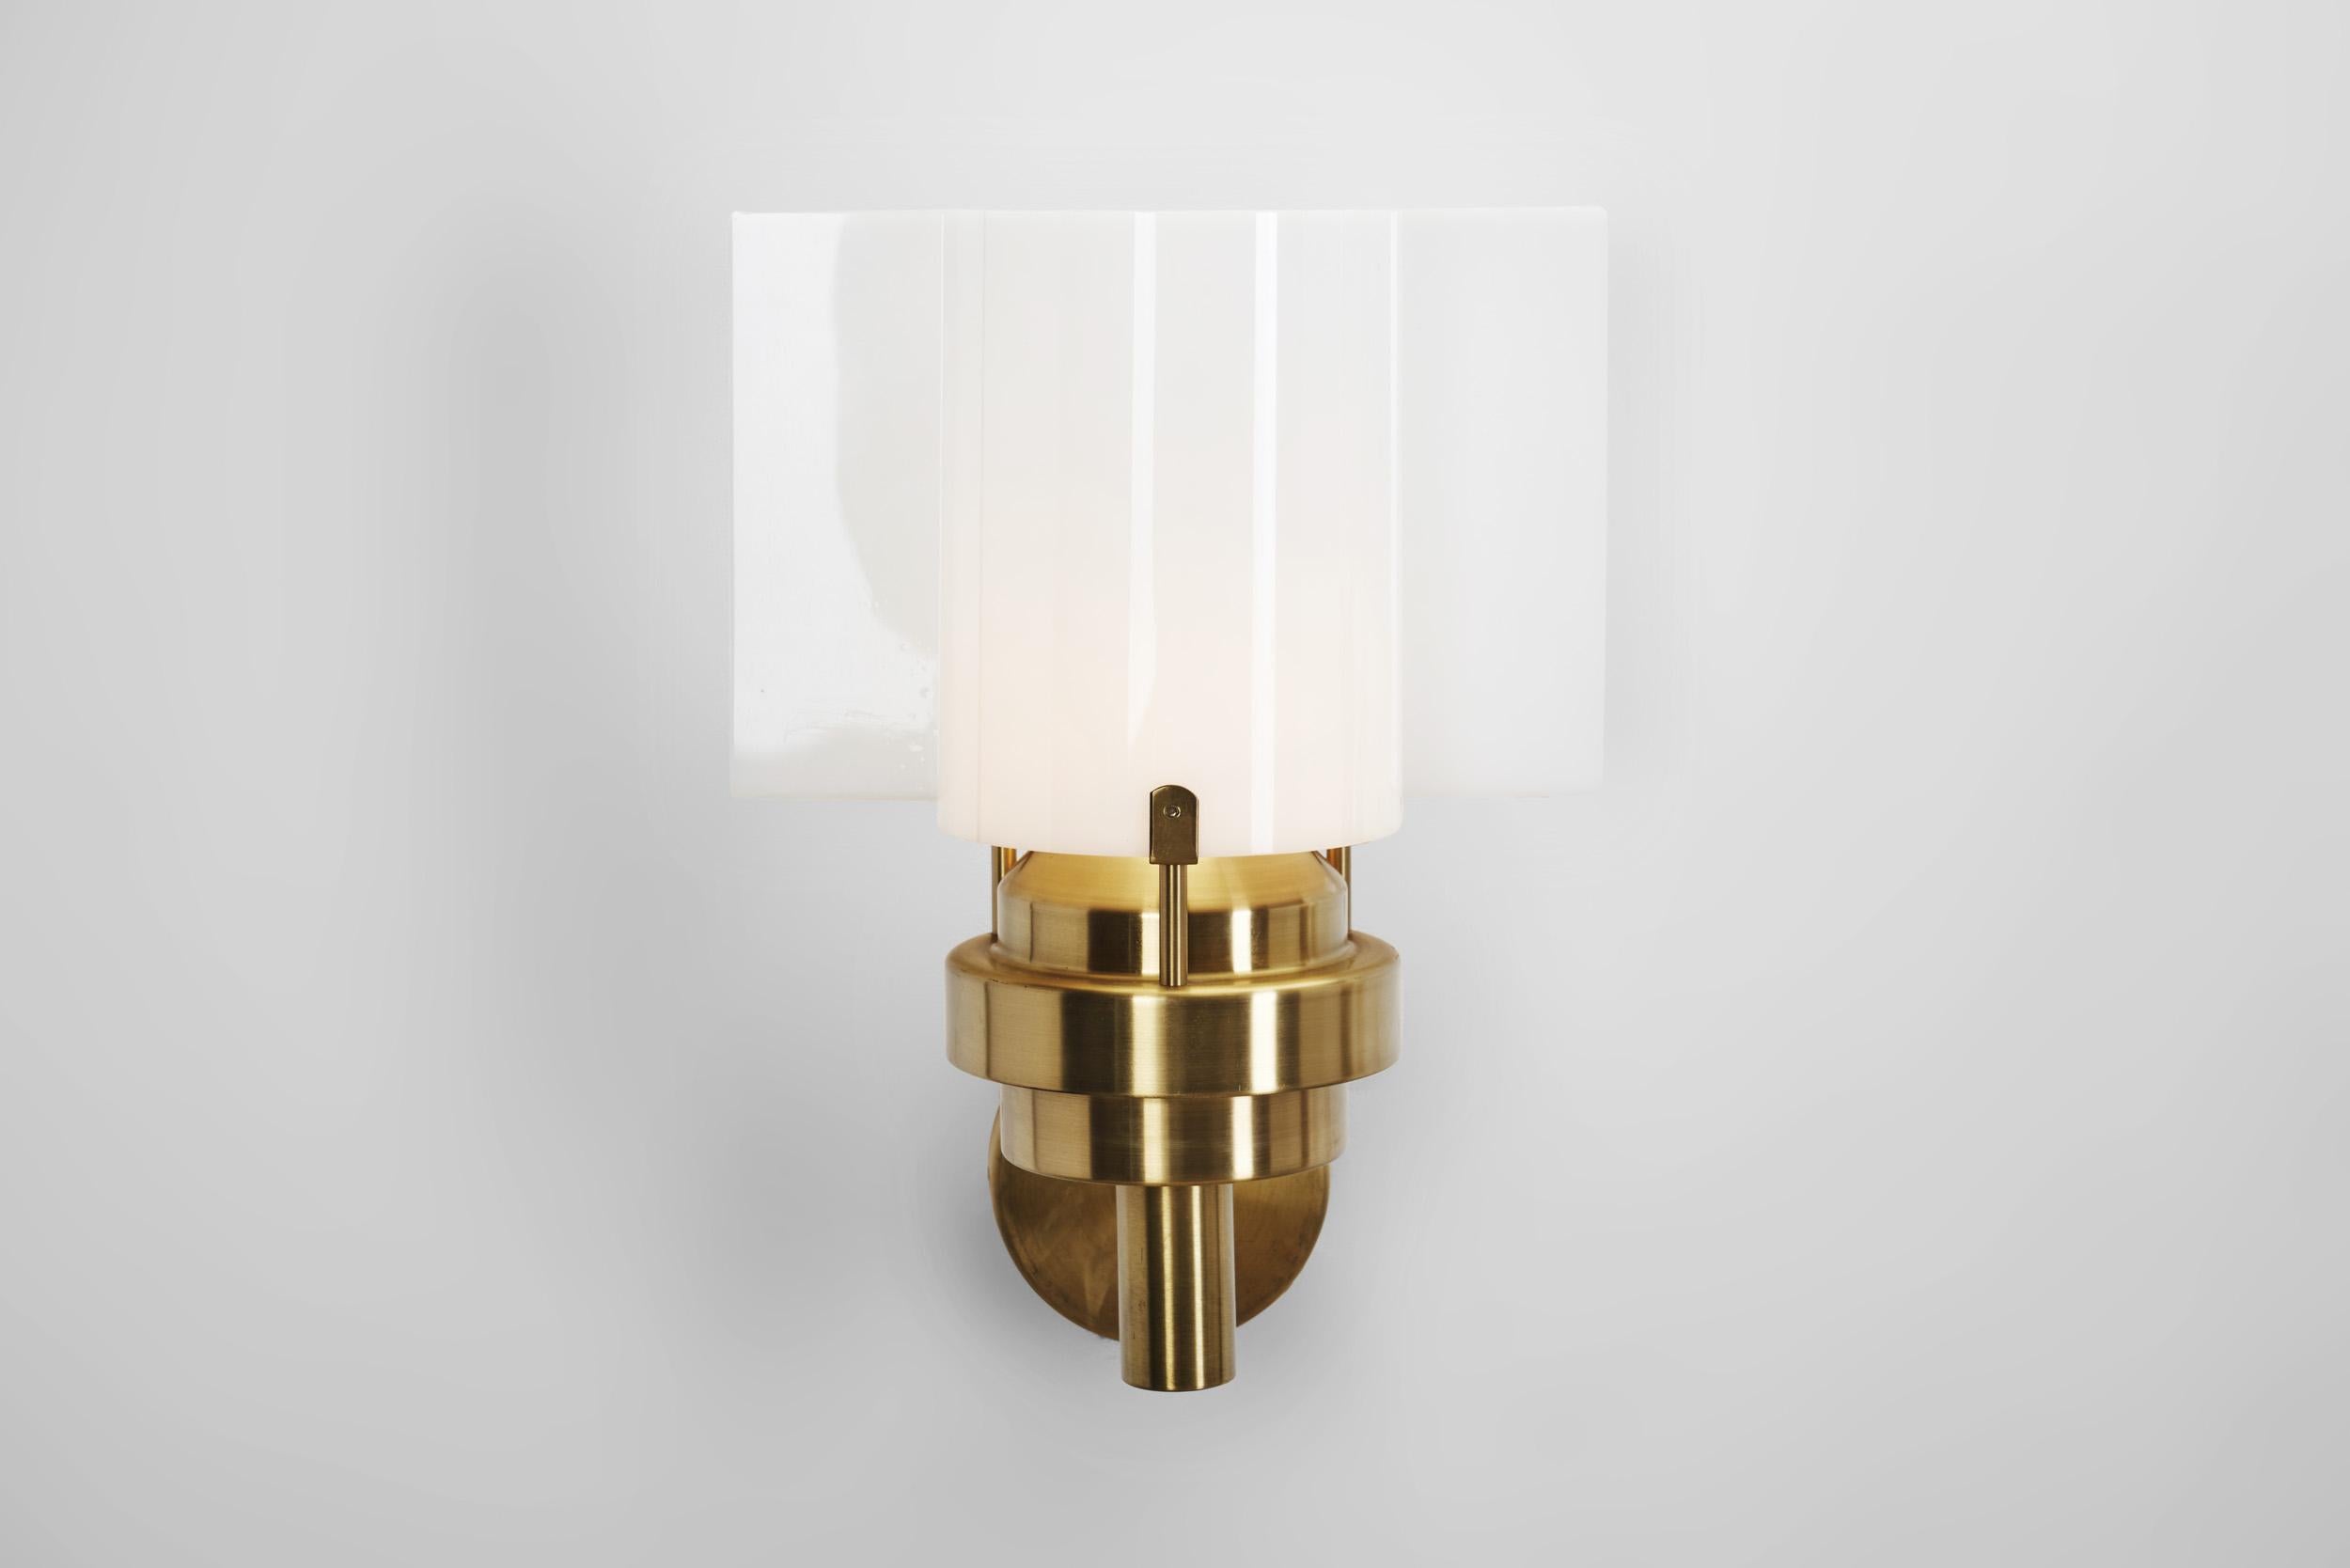 Brass and Acrylic Glass Wall Lamps by Stockmann Orno, Finland 1960s For Sale 2